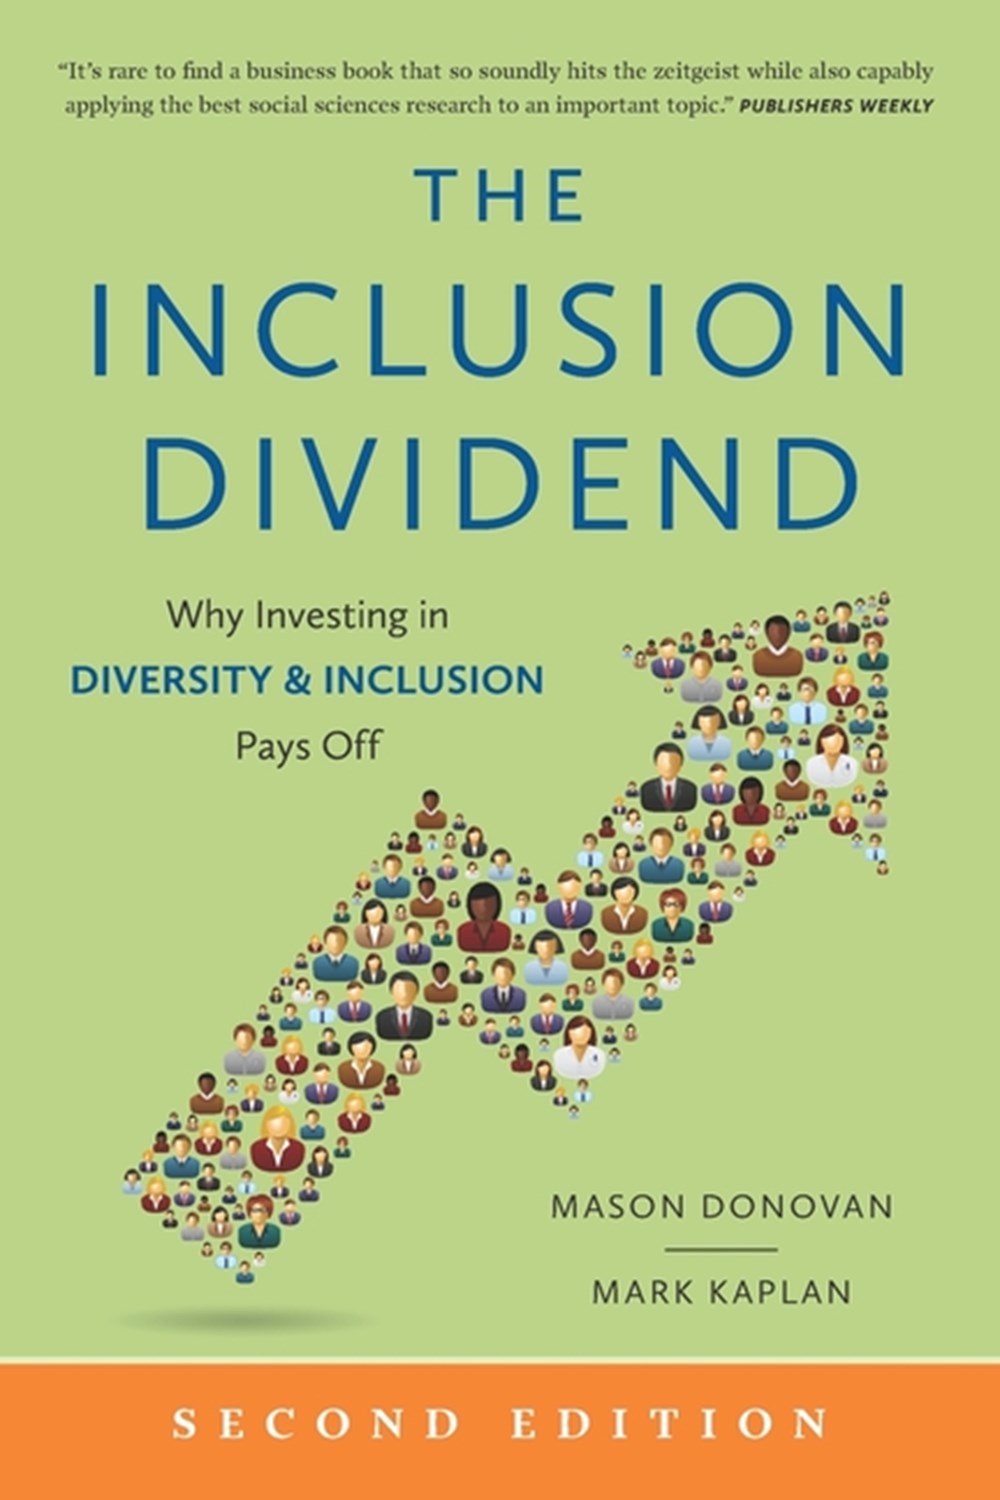 Inclusion Dividend: Why Investing in Diversity & Inclusion Pays Off